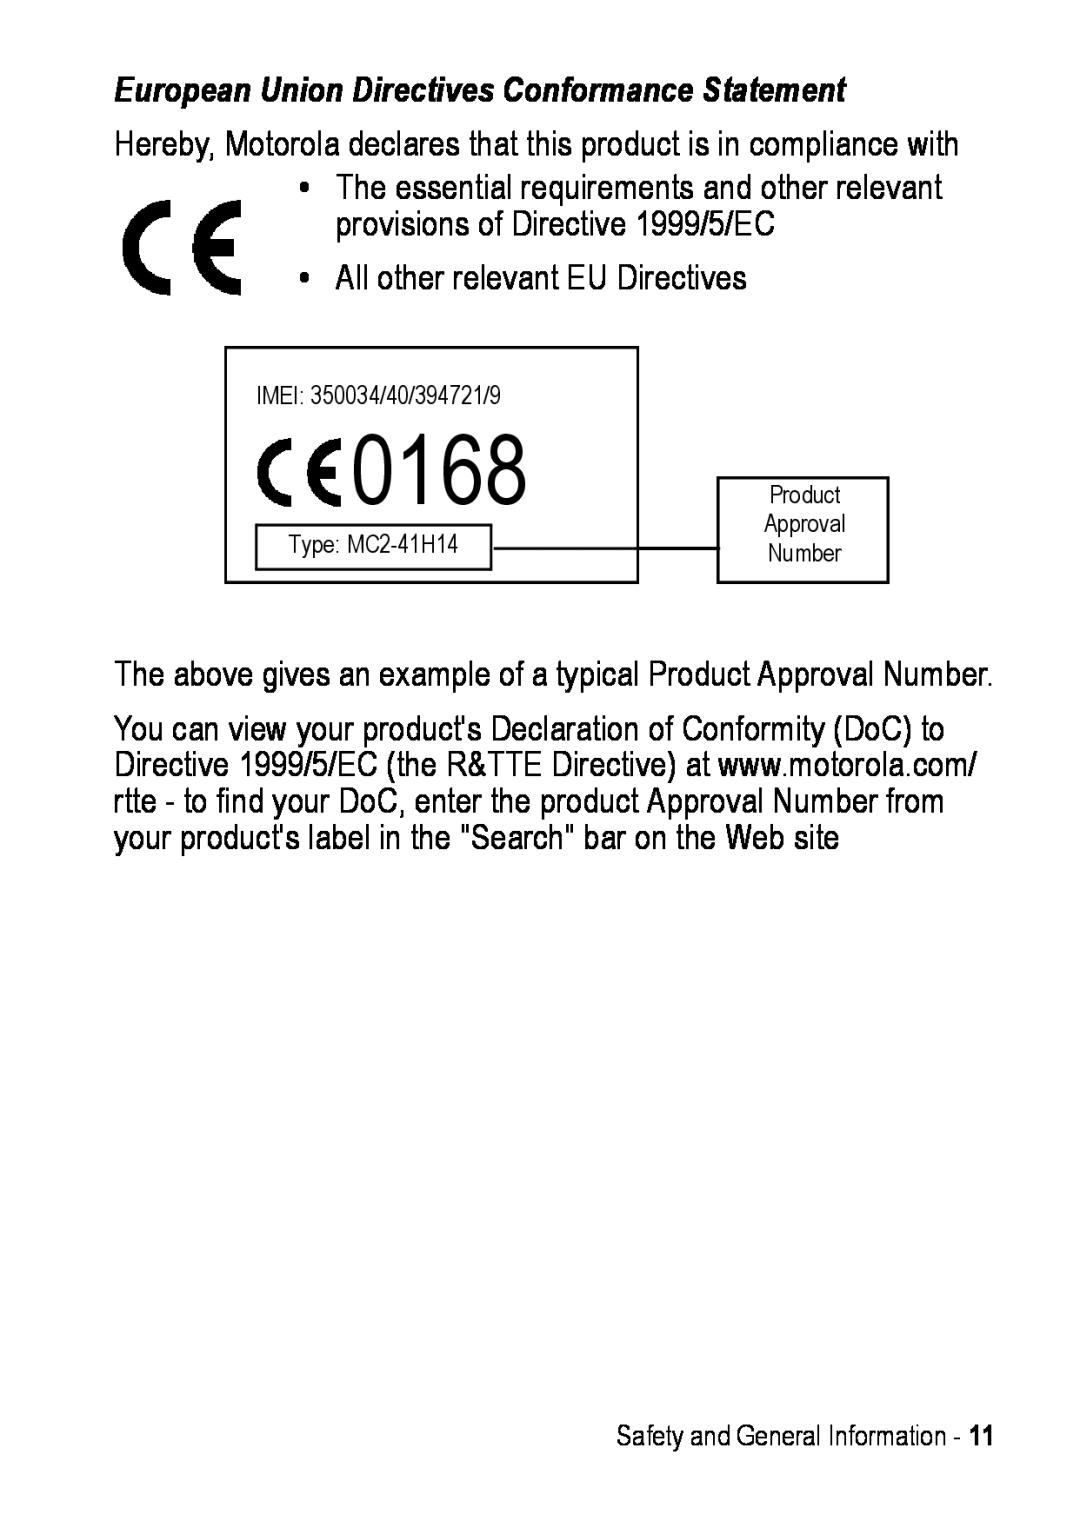 Motorola C390 manual 0168, European Union Directives Conformance Statement, Safety and General Information 